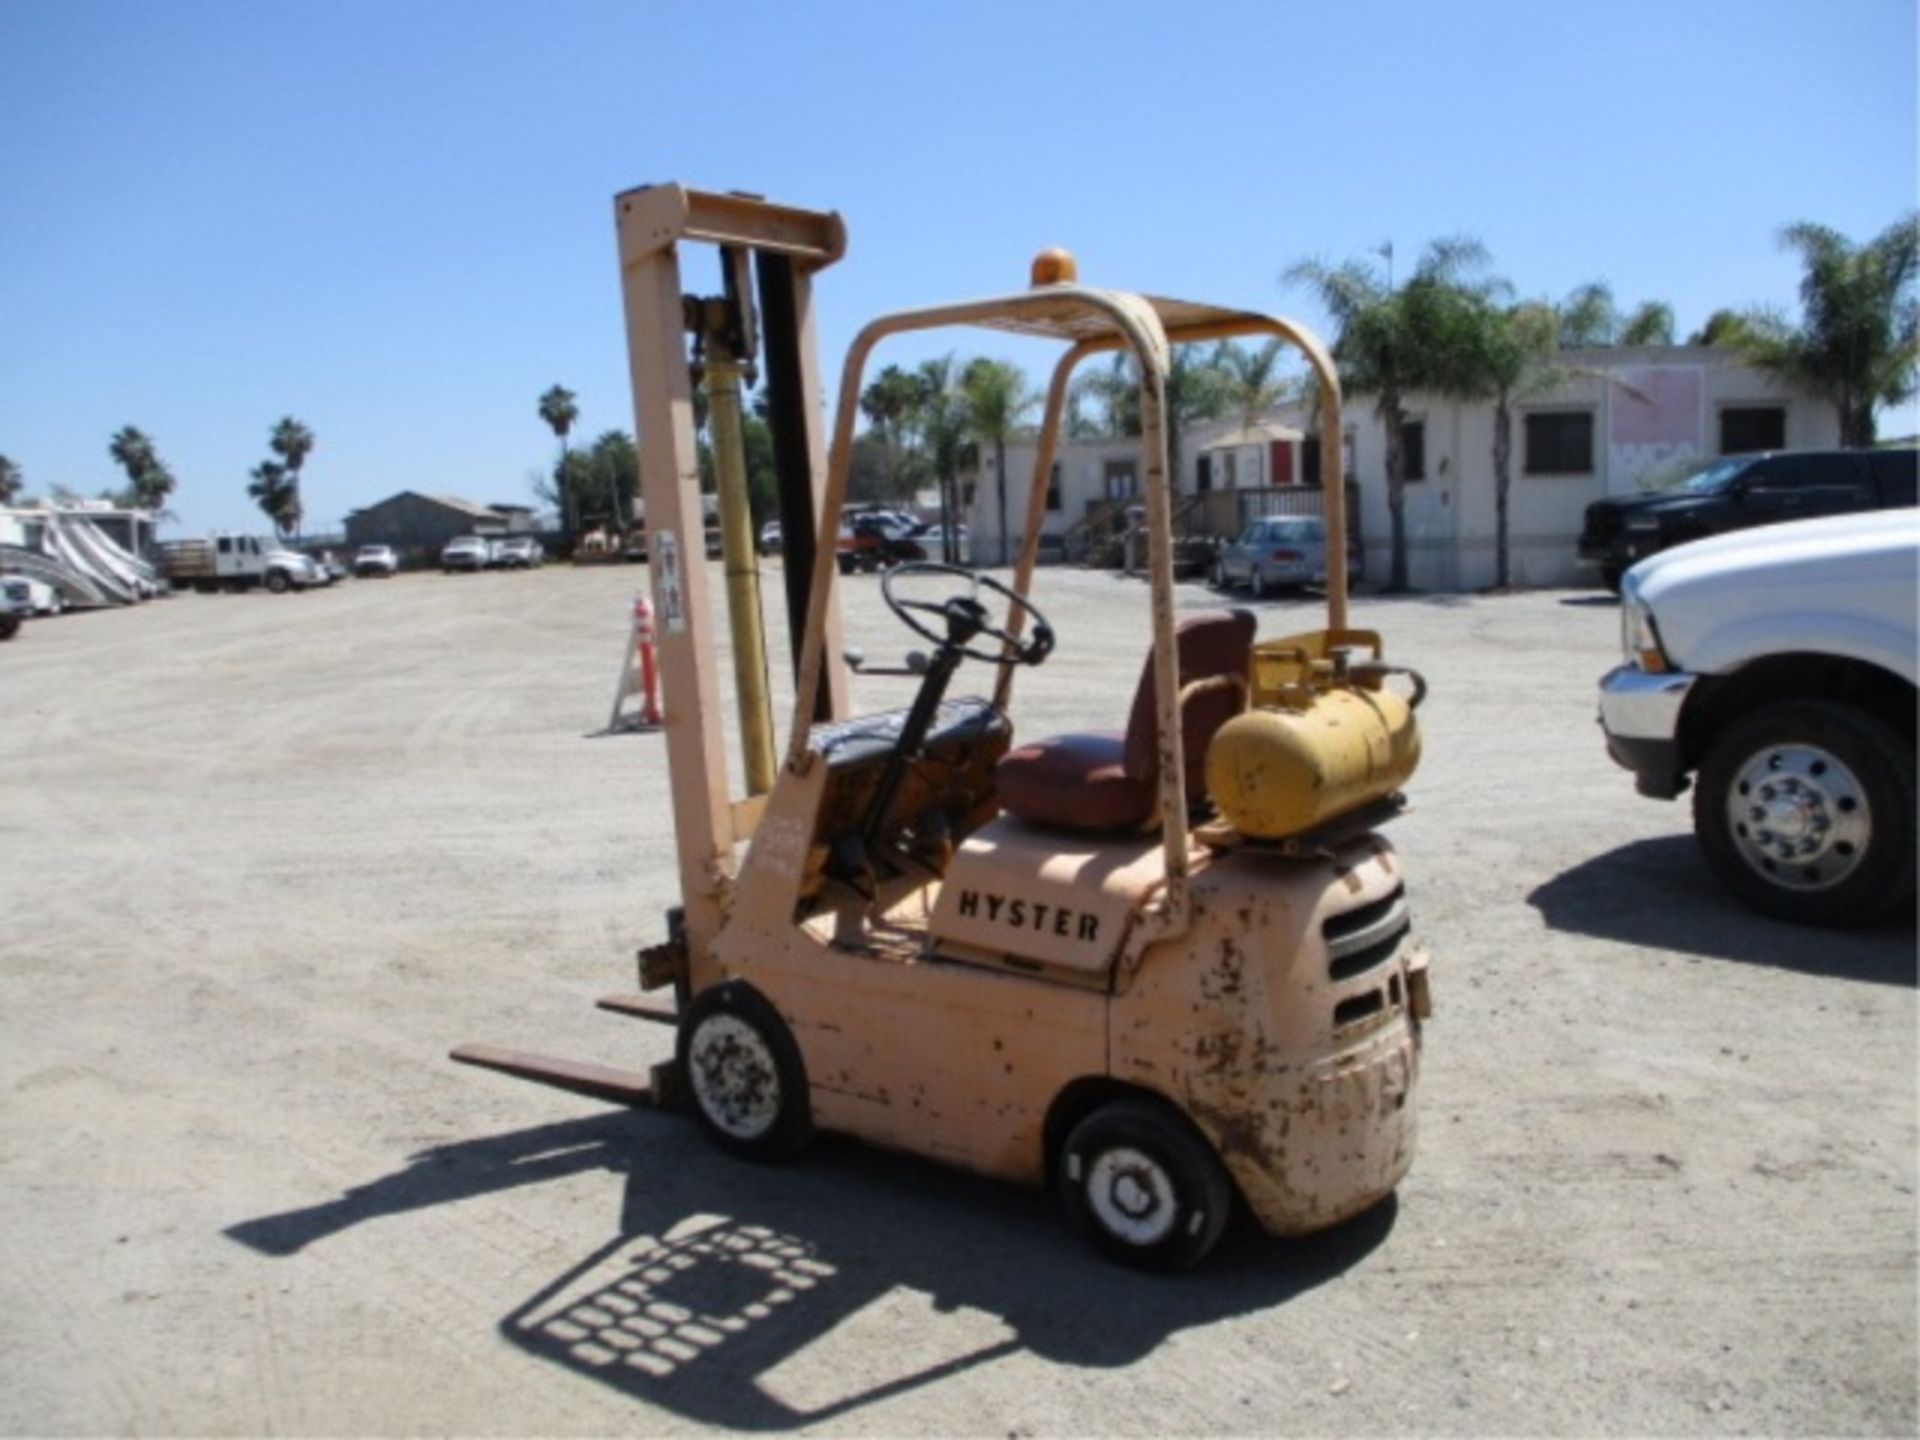 Hyster Warehouse Forklift, 4-Cyl LP Gas, Single Stage Mast, 4' Forks, Canopy, Solid Rubber Tires, - Image 10 of 27